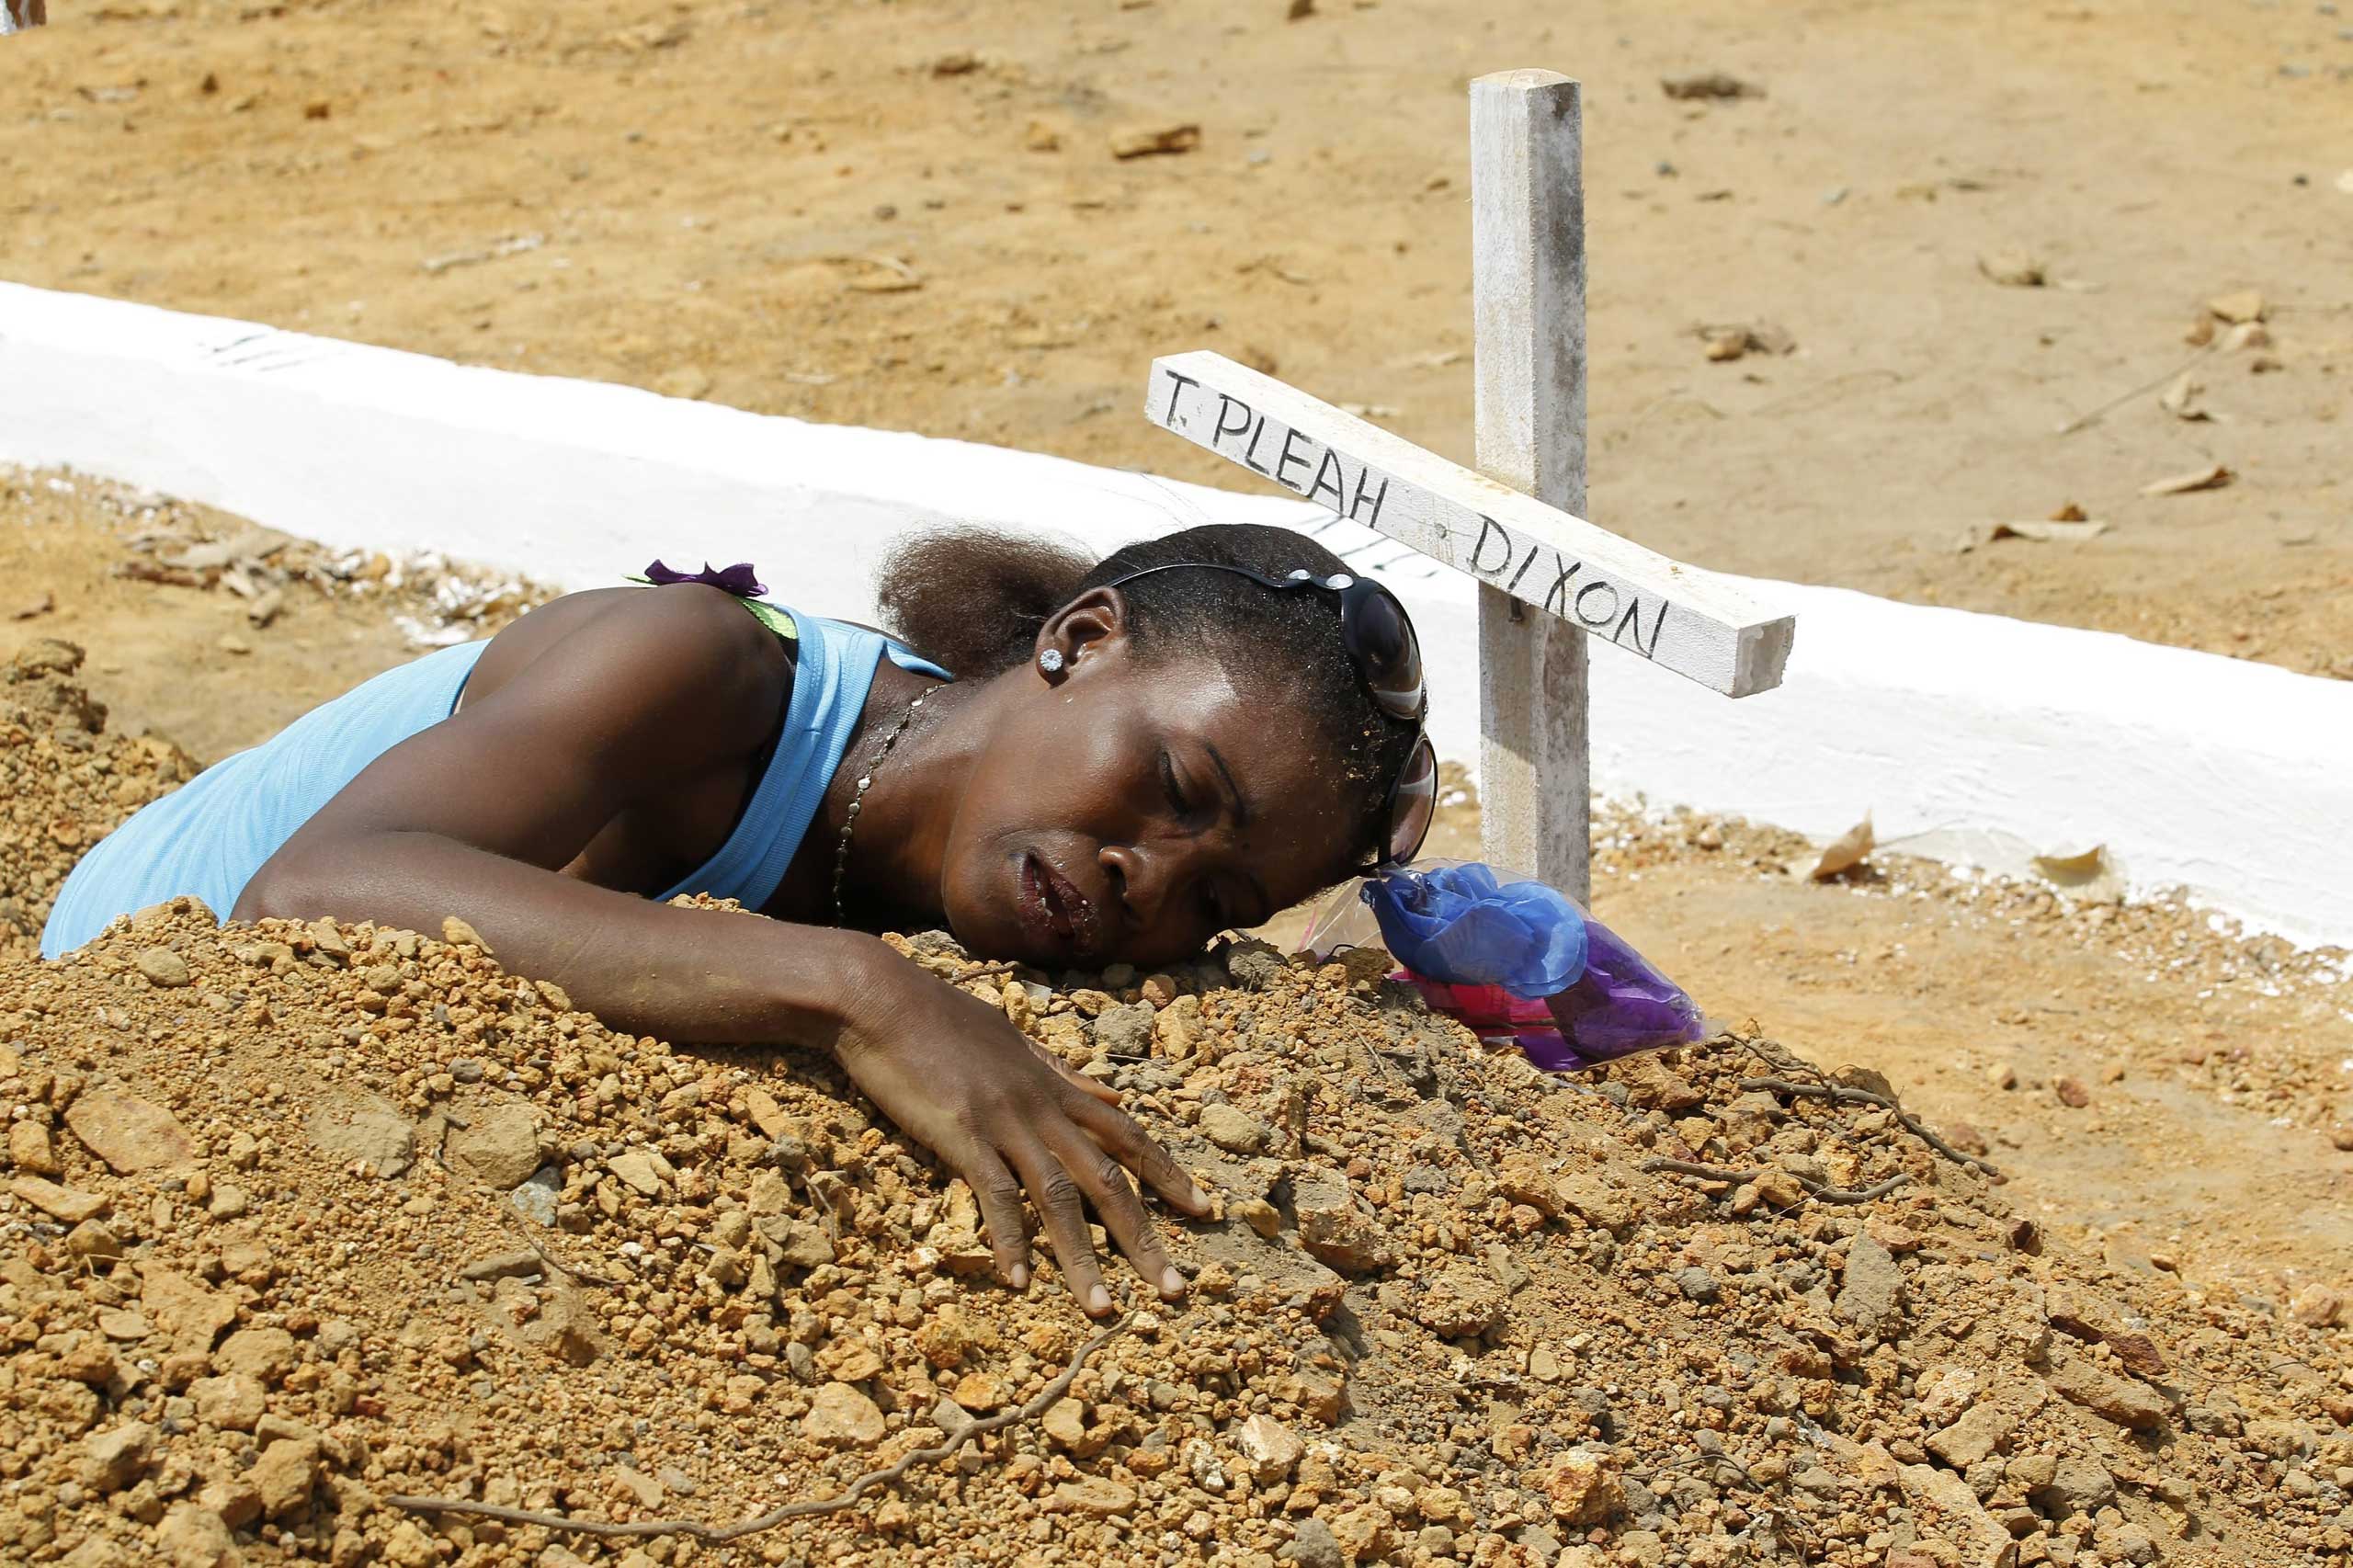 A woman mourns at the grave of her late brother at the National Cemetry on Disco Hill, Margibi County, Liberia, on March 11, 2015 (Ahmed Jallanzo—EPA)